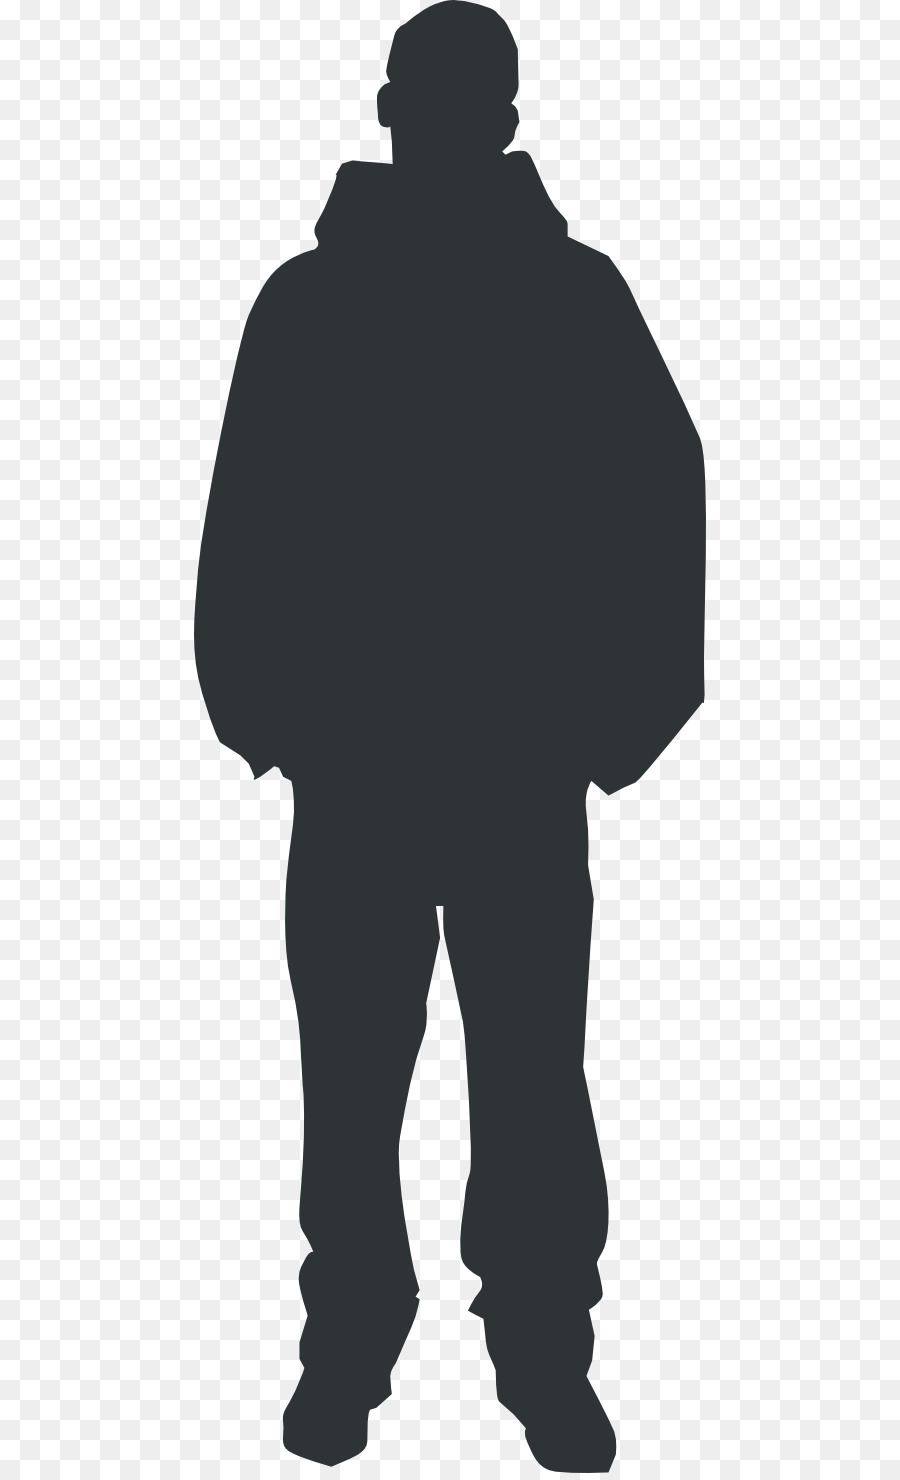 Outline Person Scalable Vector Graphics Clip art - People Outline png download - 512*1473 - Free Transparent Outline png Download.